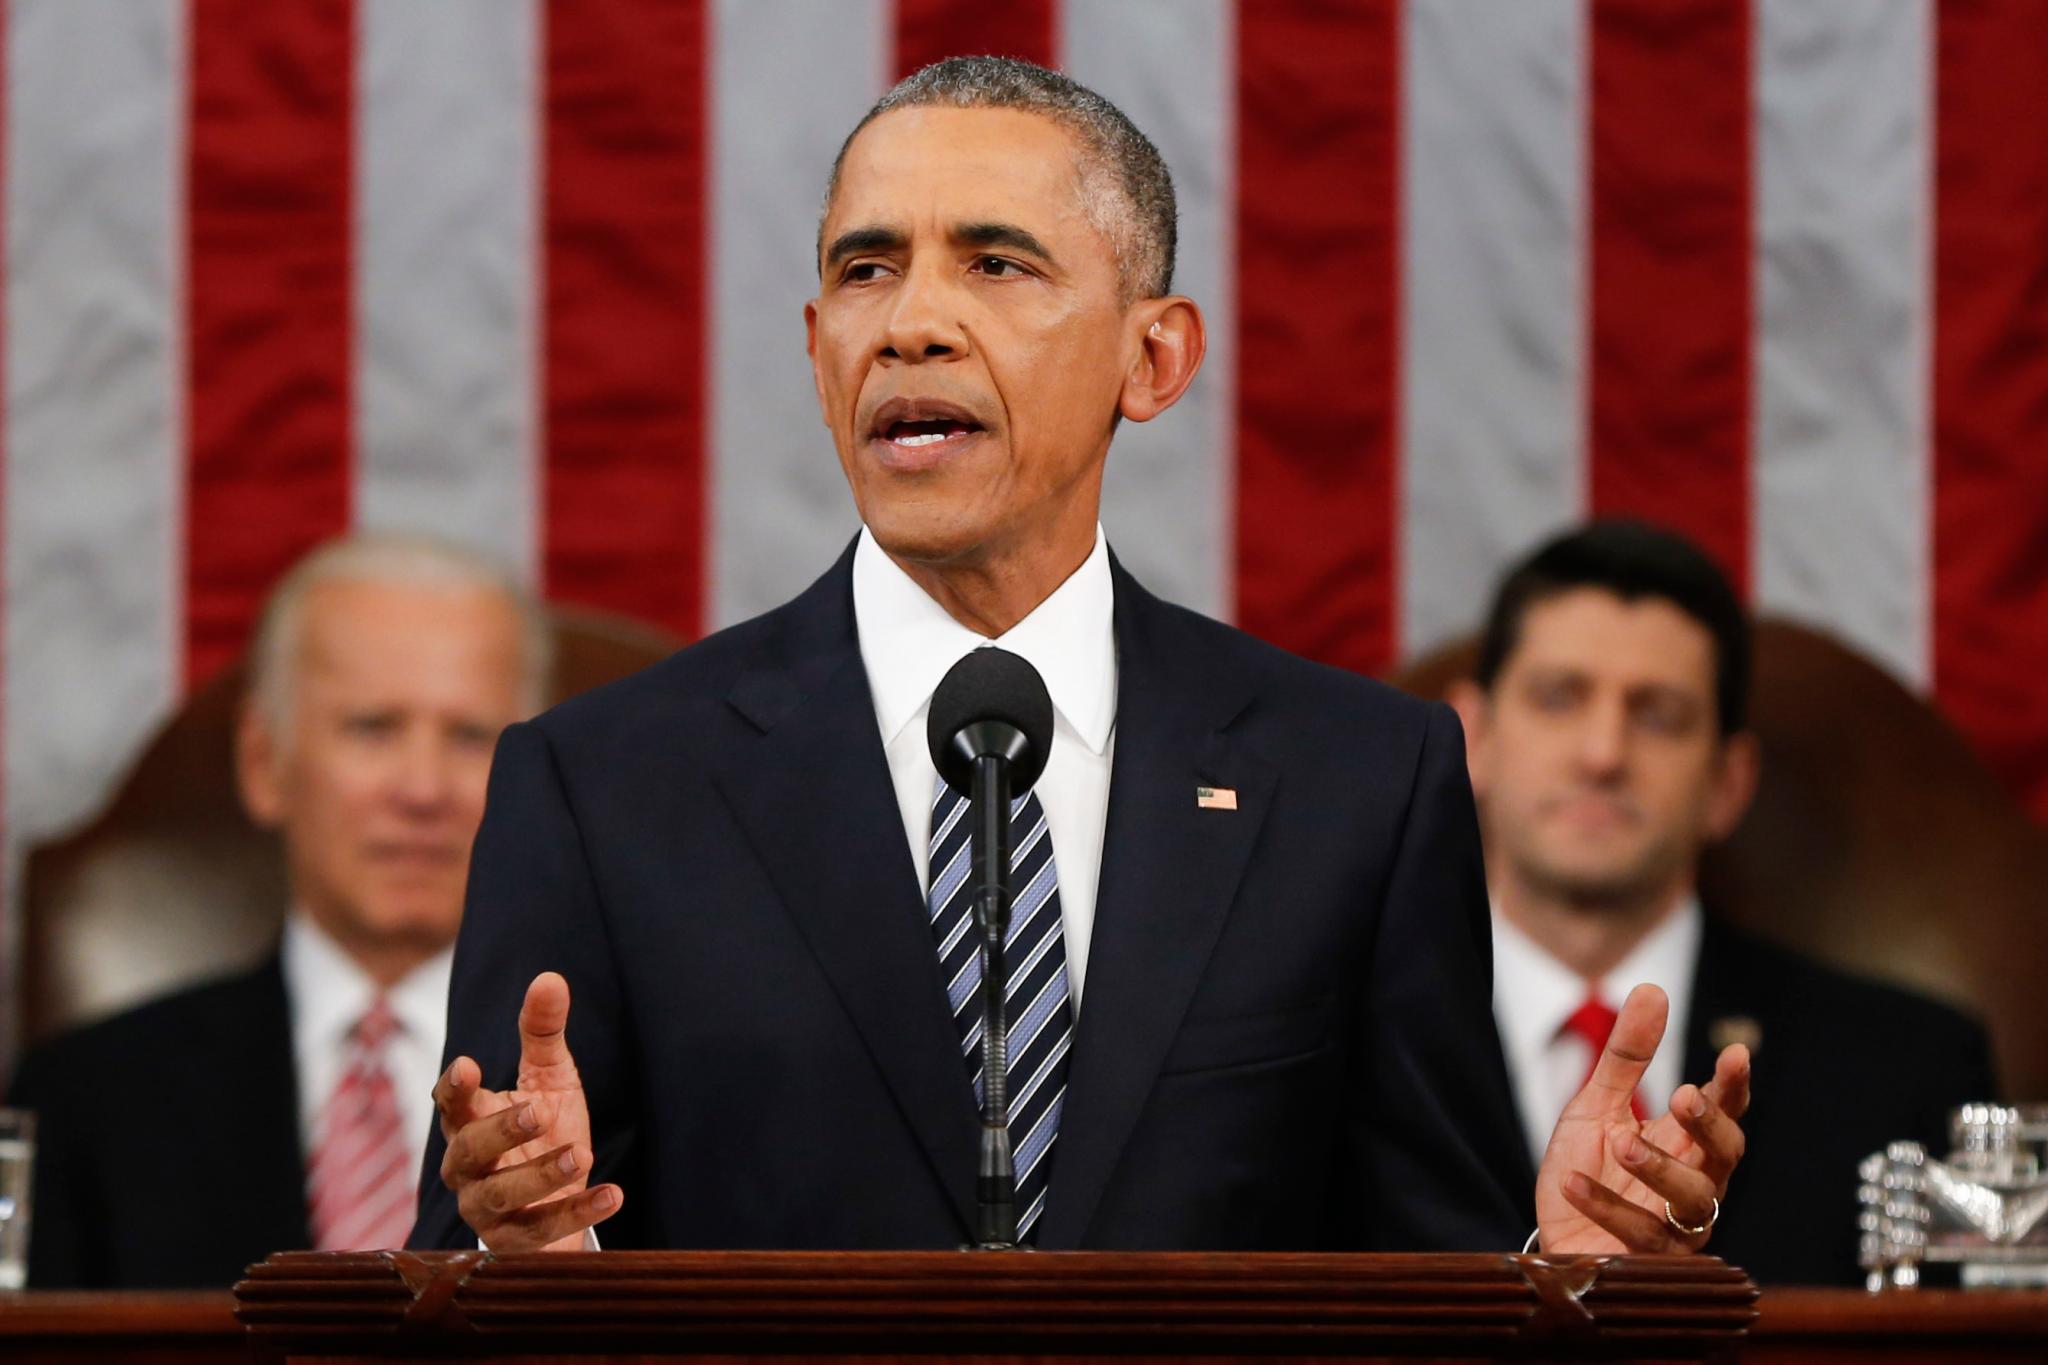 Did You Miss President Obama's State of the Union Address? Here’s Everything You Need to Know